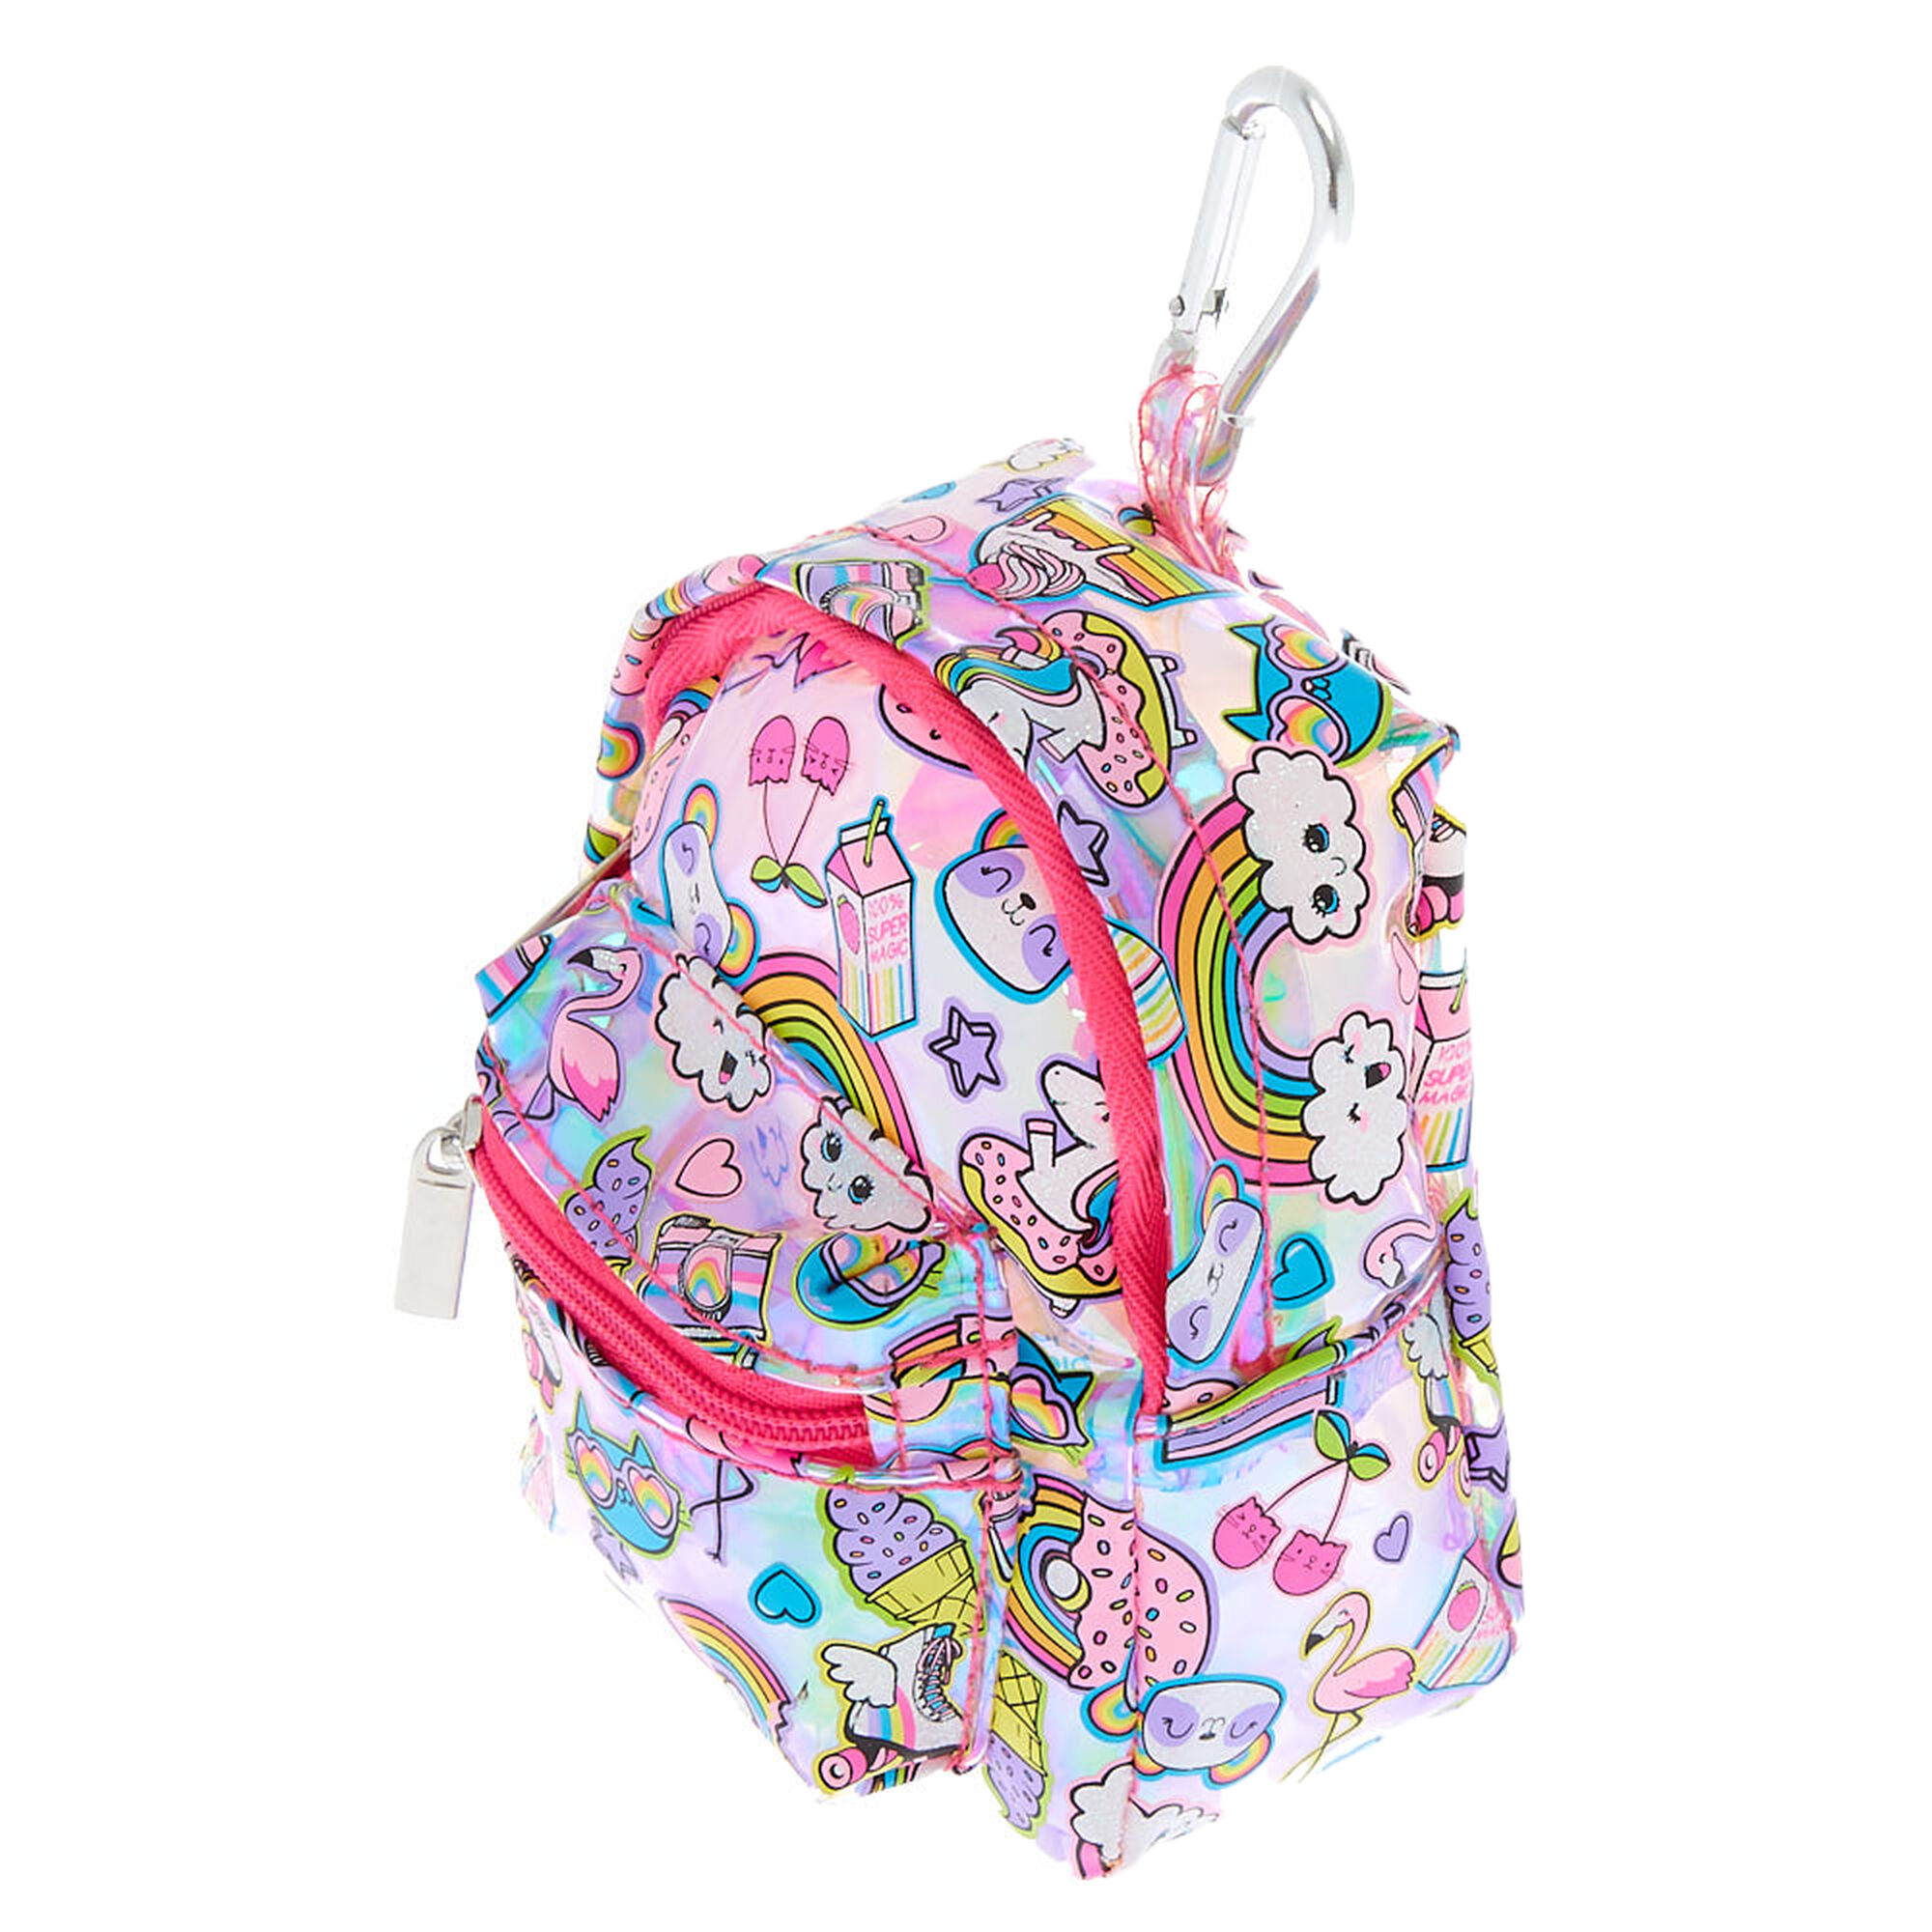 Rainbow Emoticon Mini Backpack Keychain - Pink | Claire's